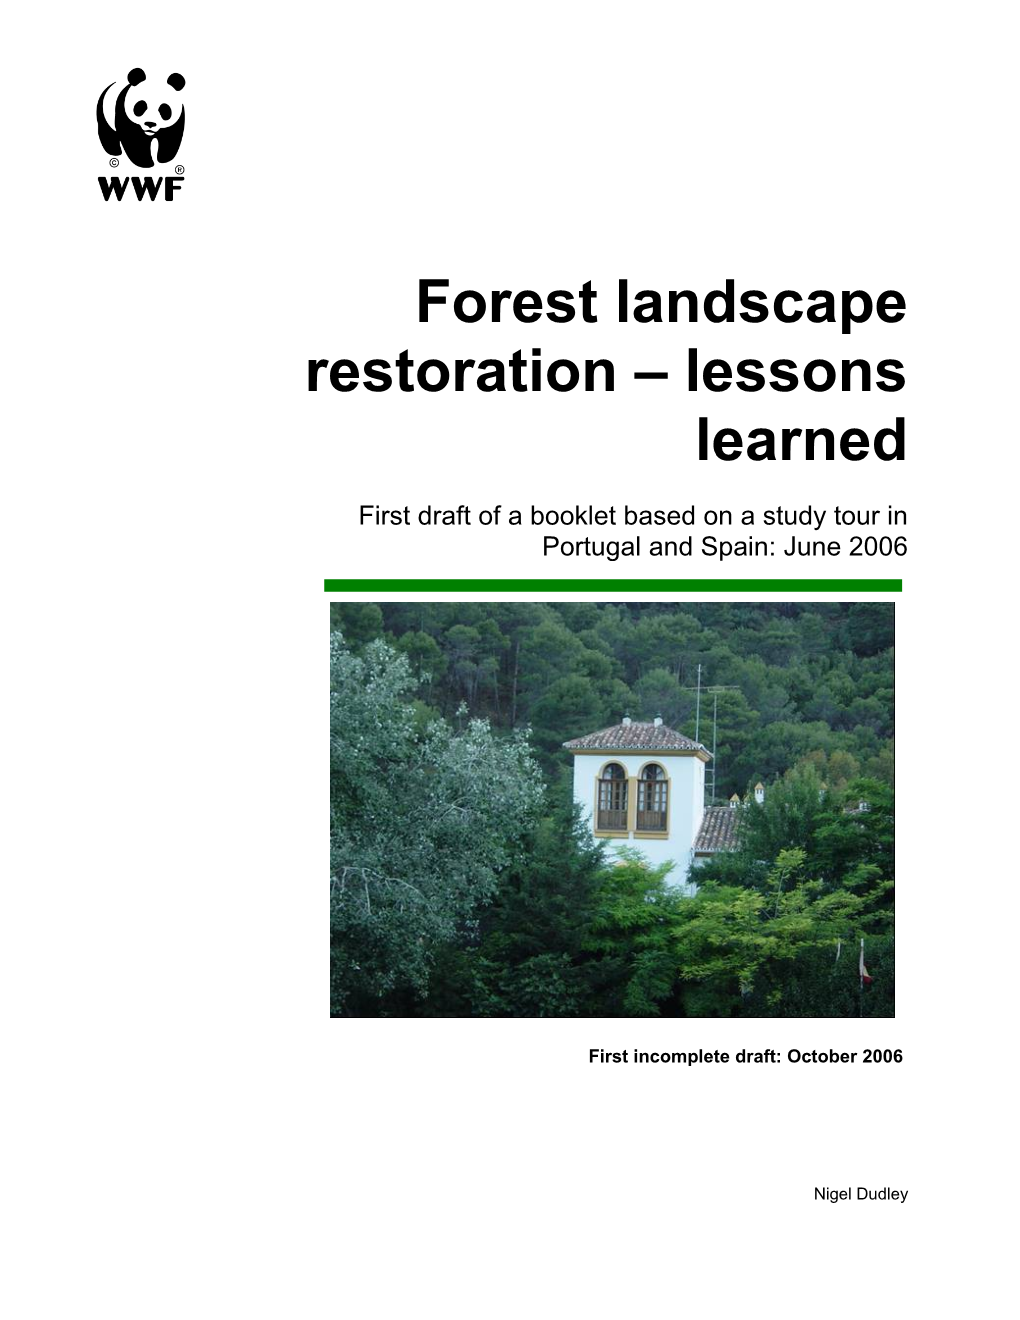 In 2000, WWF Collaborated with IUCN in Defining What Was Called Forest Landscape Restoration